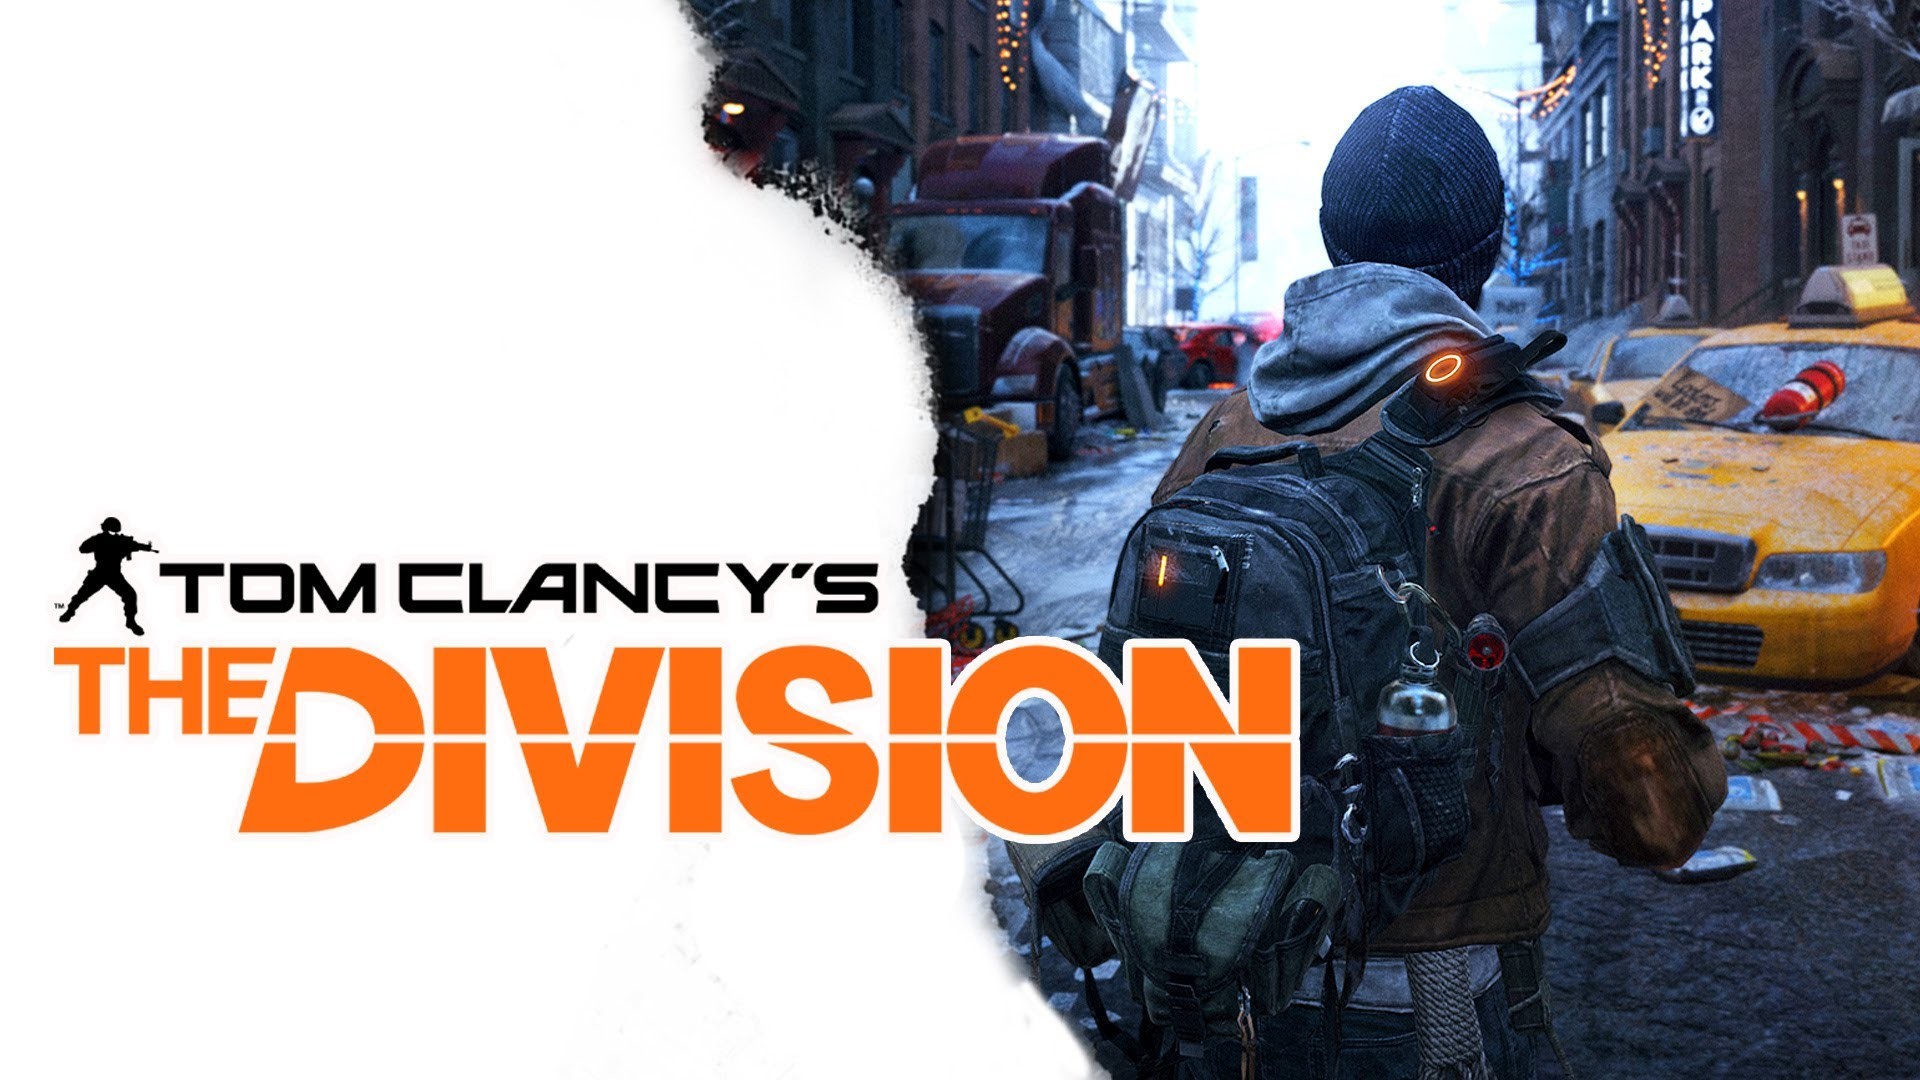 Tom clancys the division wallpaper hd Wallpaper